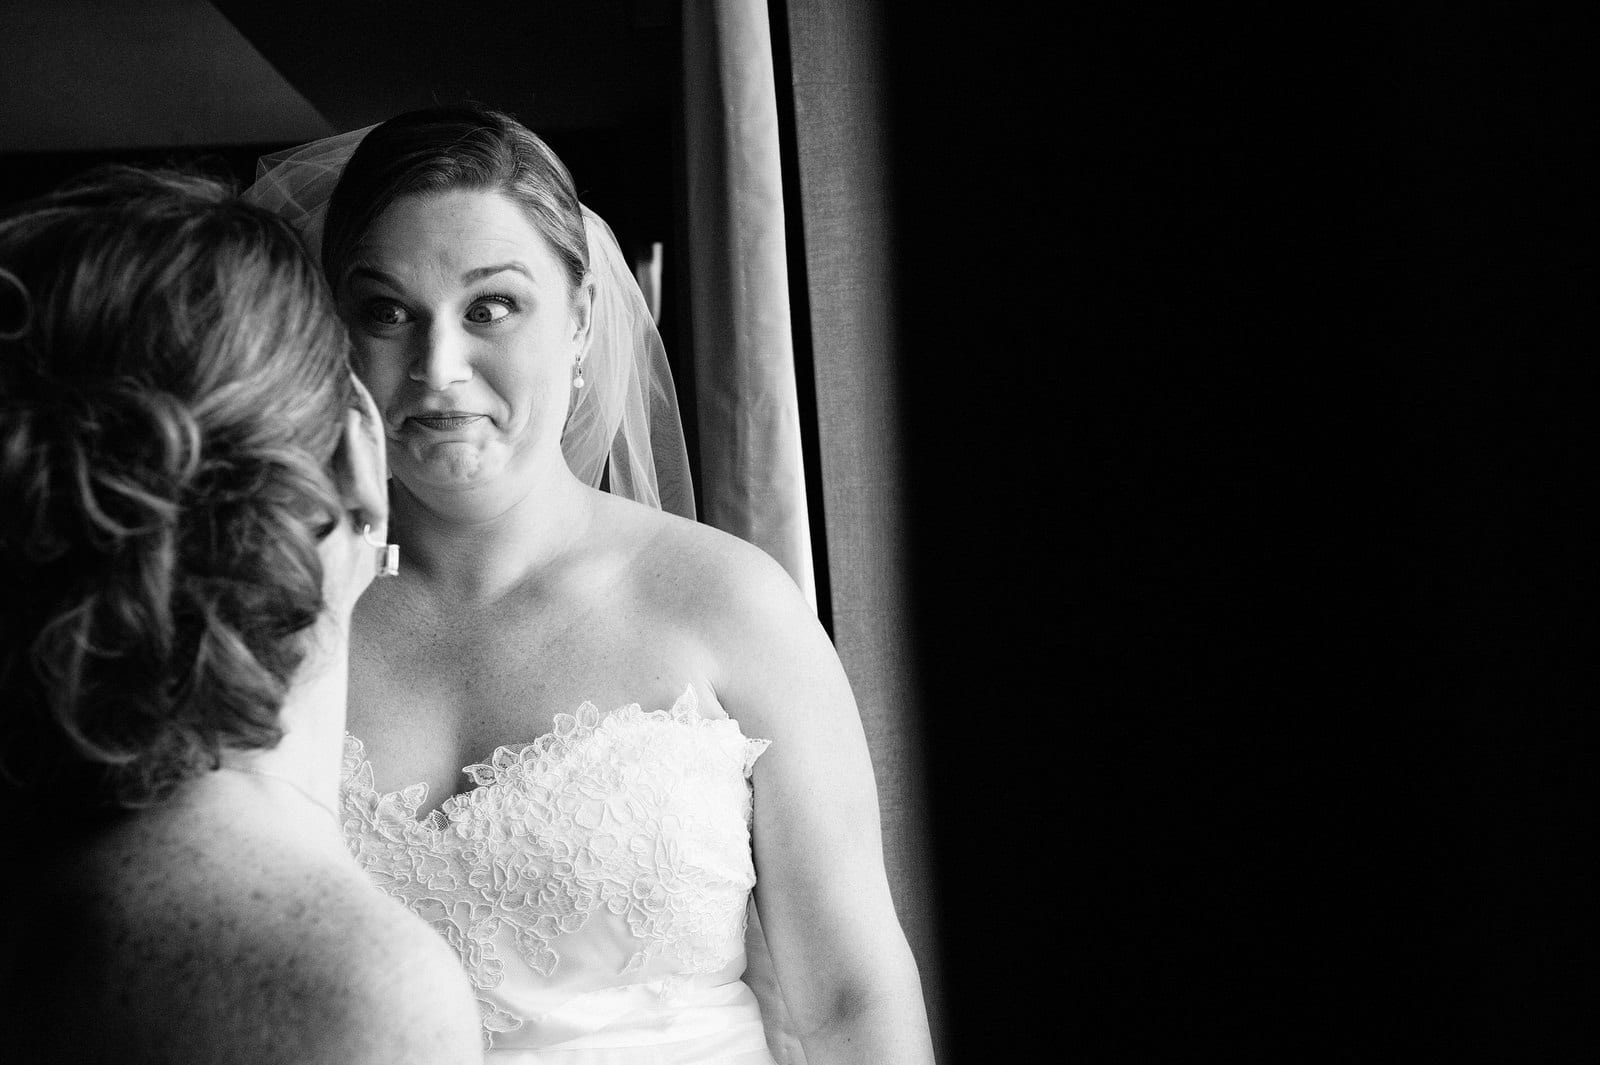 A bride makes a funny face to her bridesmaid after looking out the window of her hotel room.